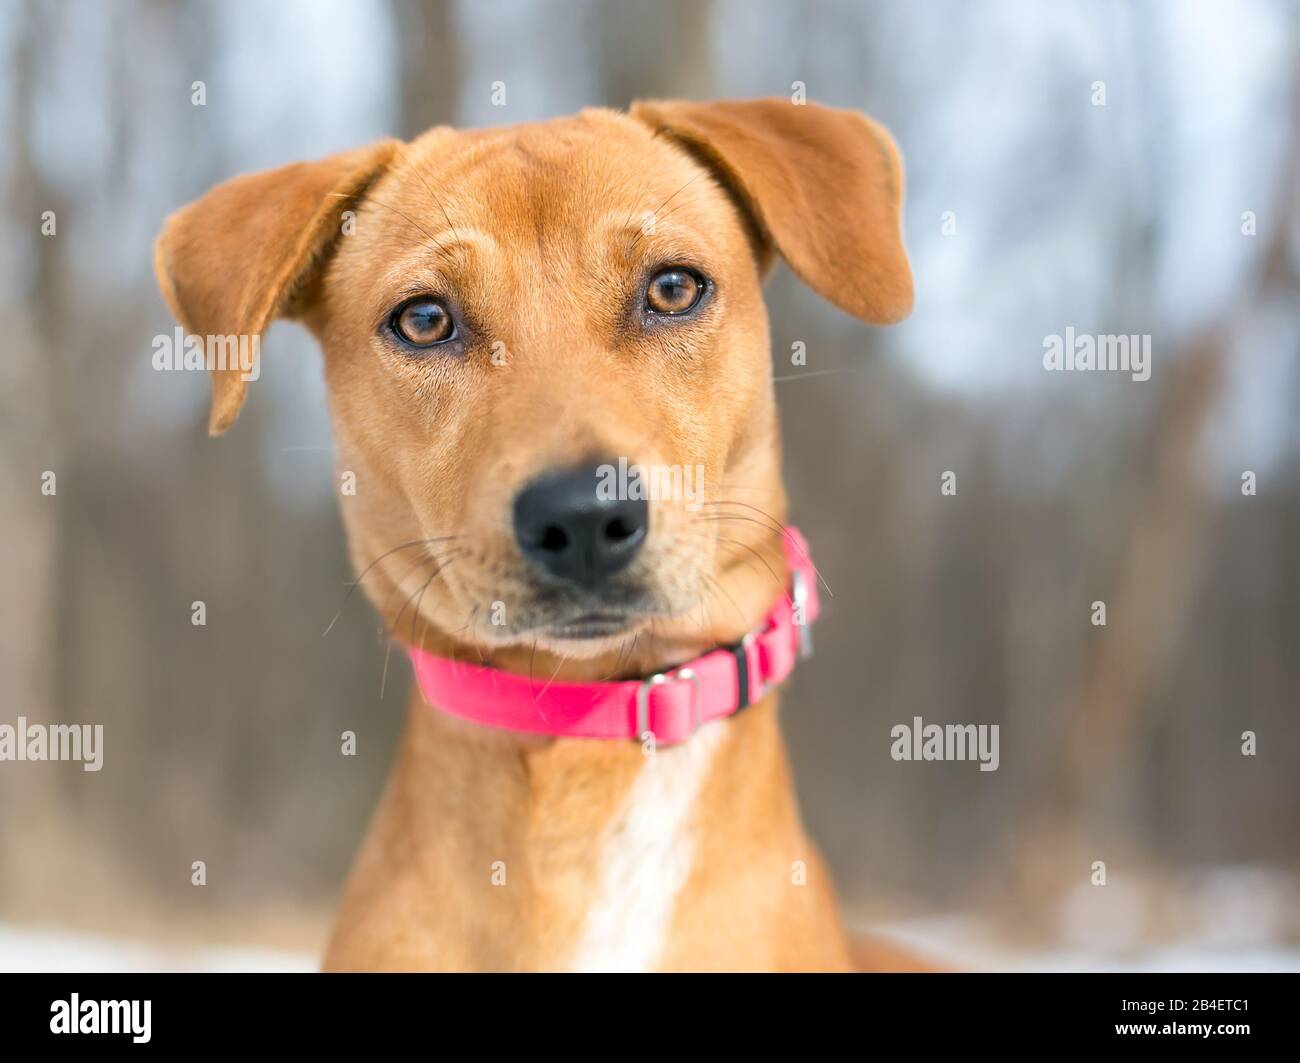 A young Terrier mixed breed dog with floppy ears outdoors Stock Photo